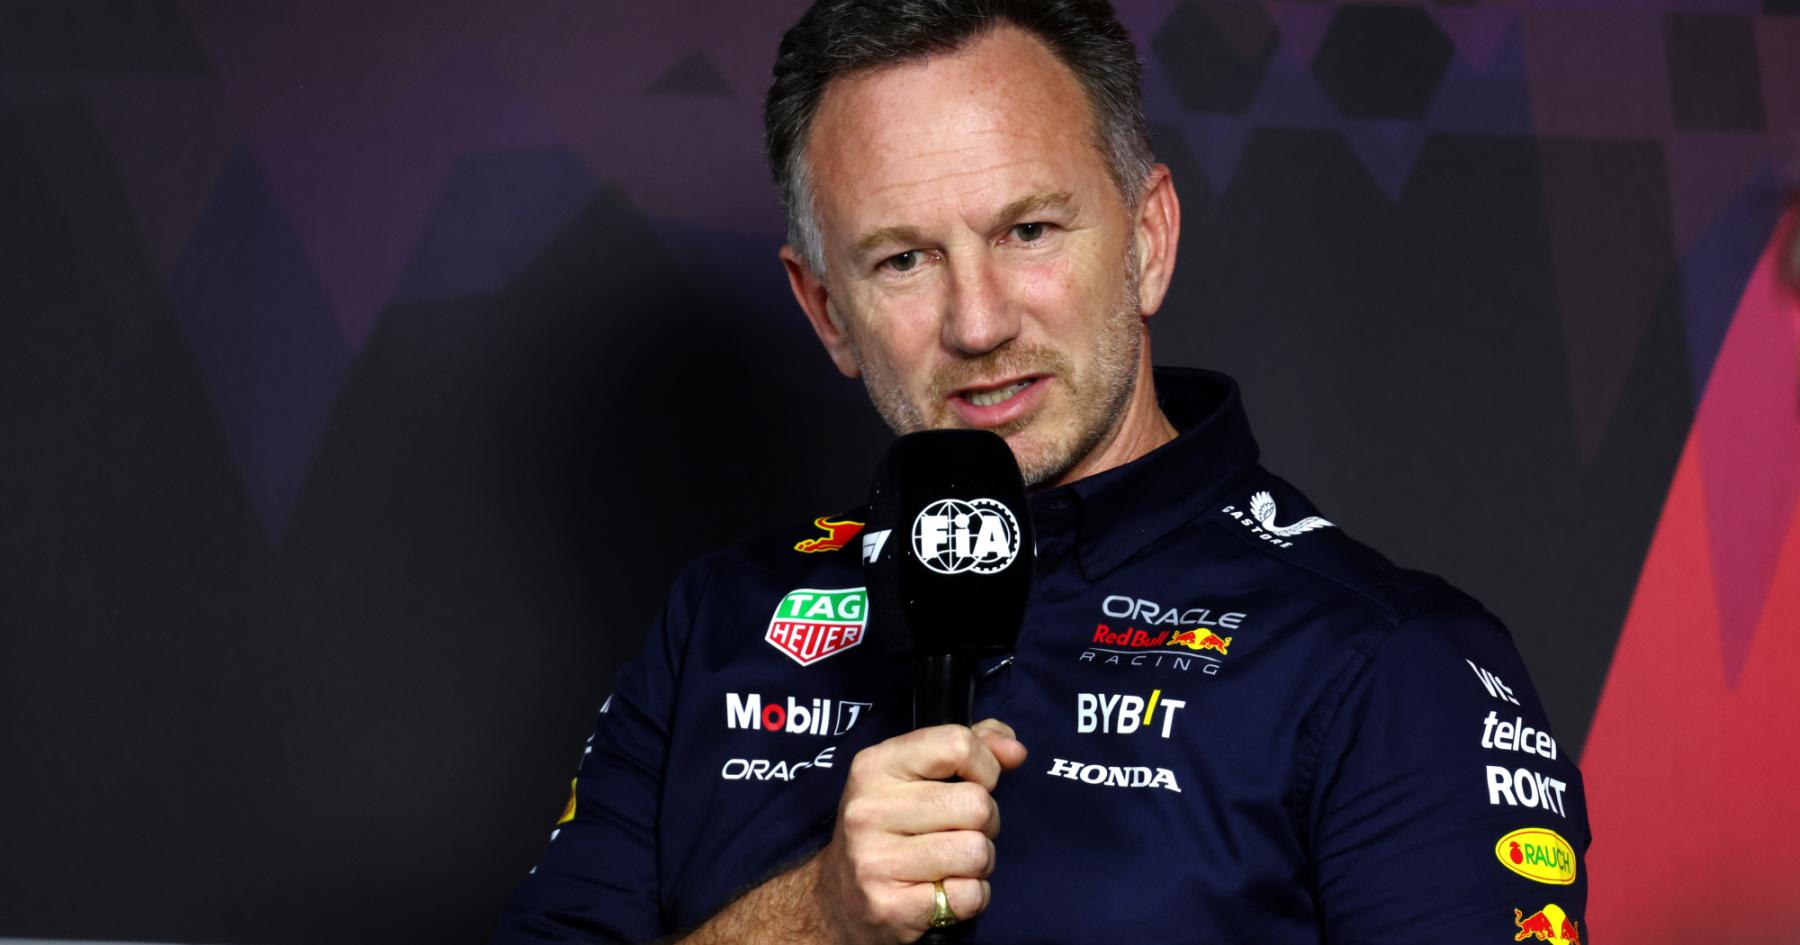 Red Bull's Bold Move: A Testament to Confidence in Horner's Leadership